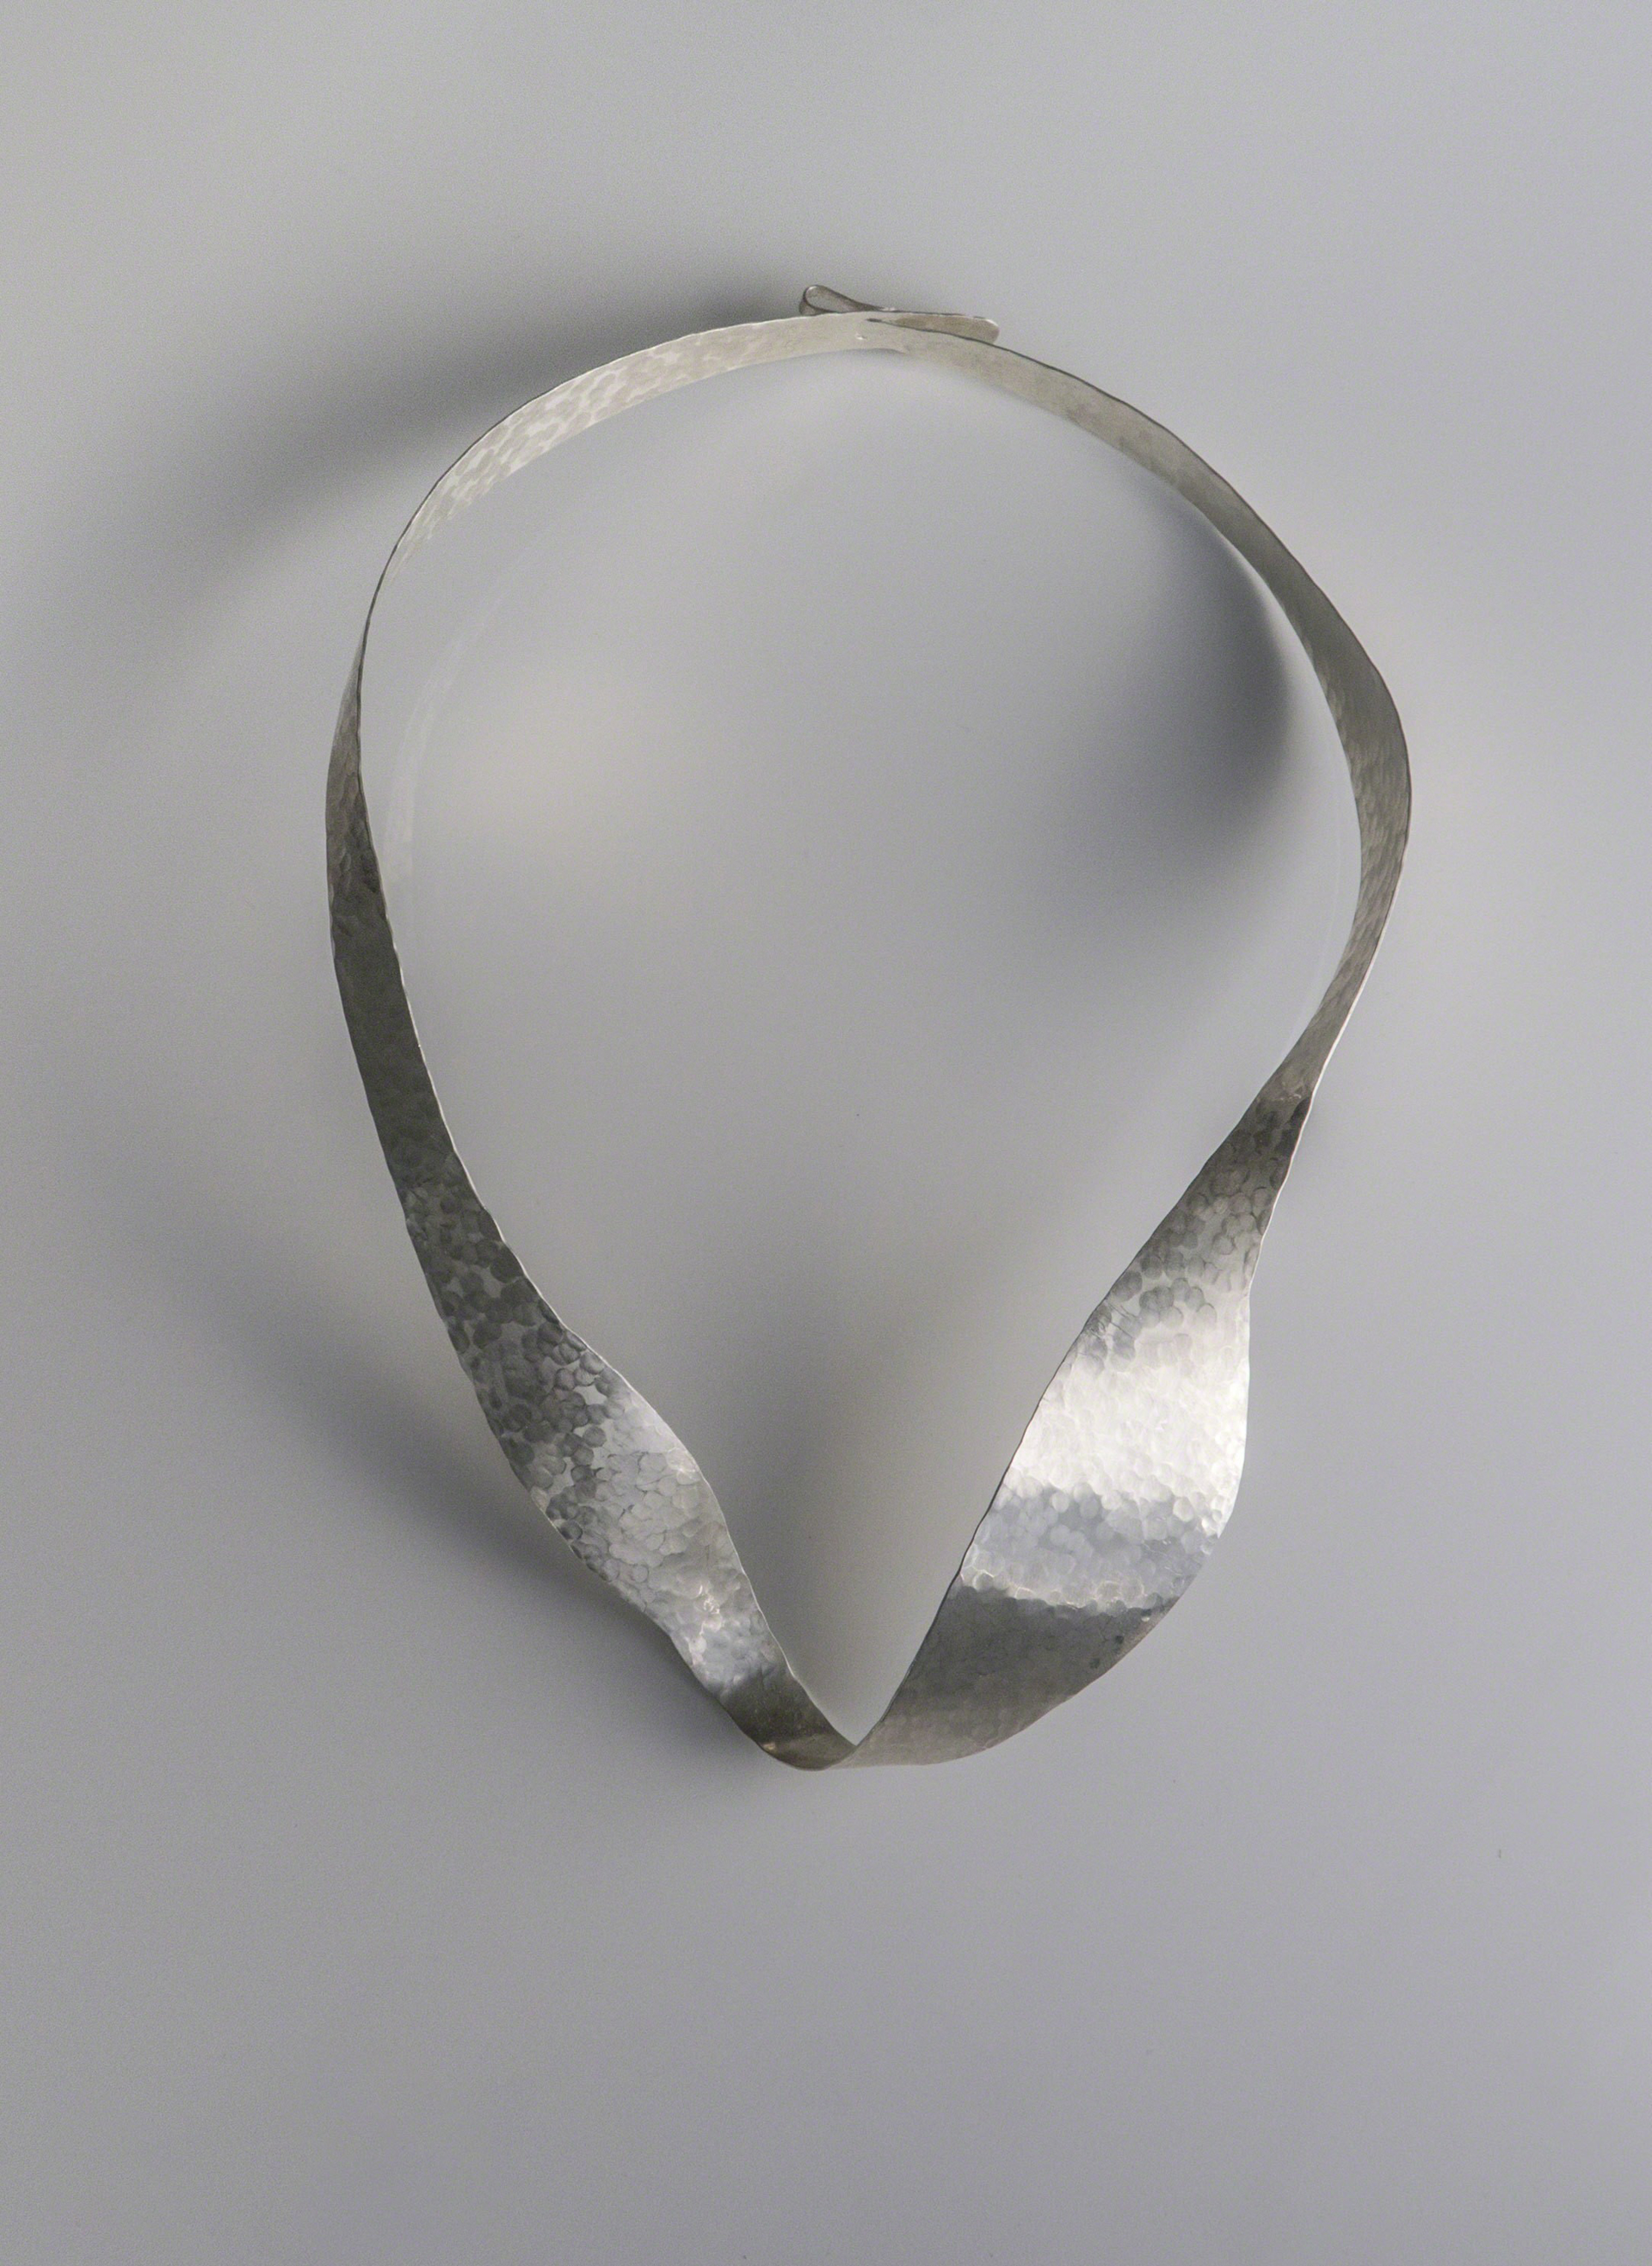 "Halo" Necklace by Jacques Jarrige